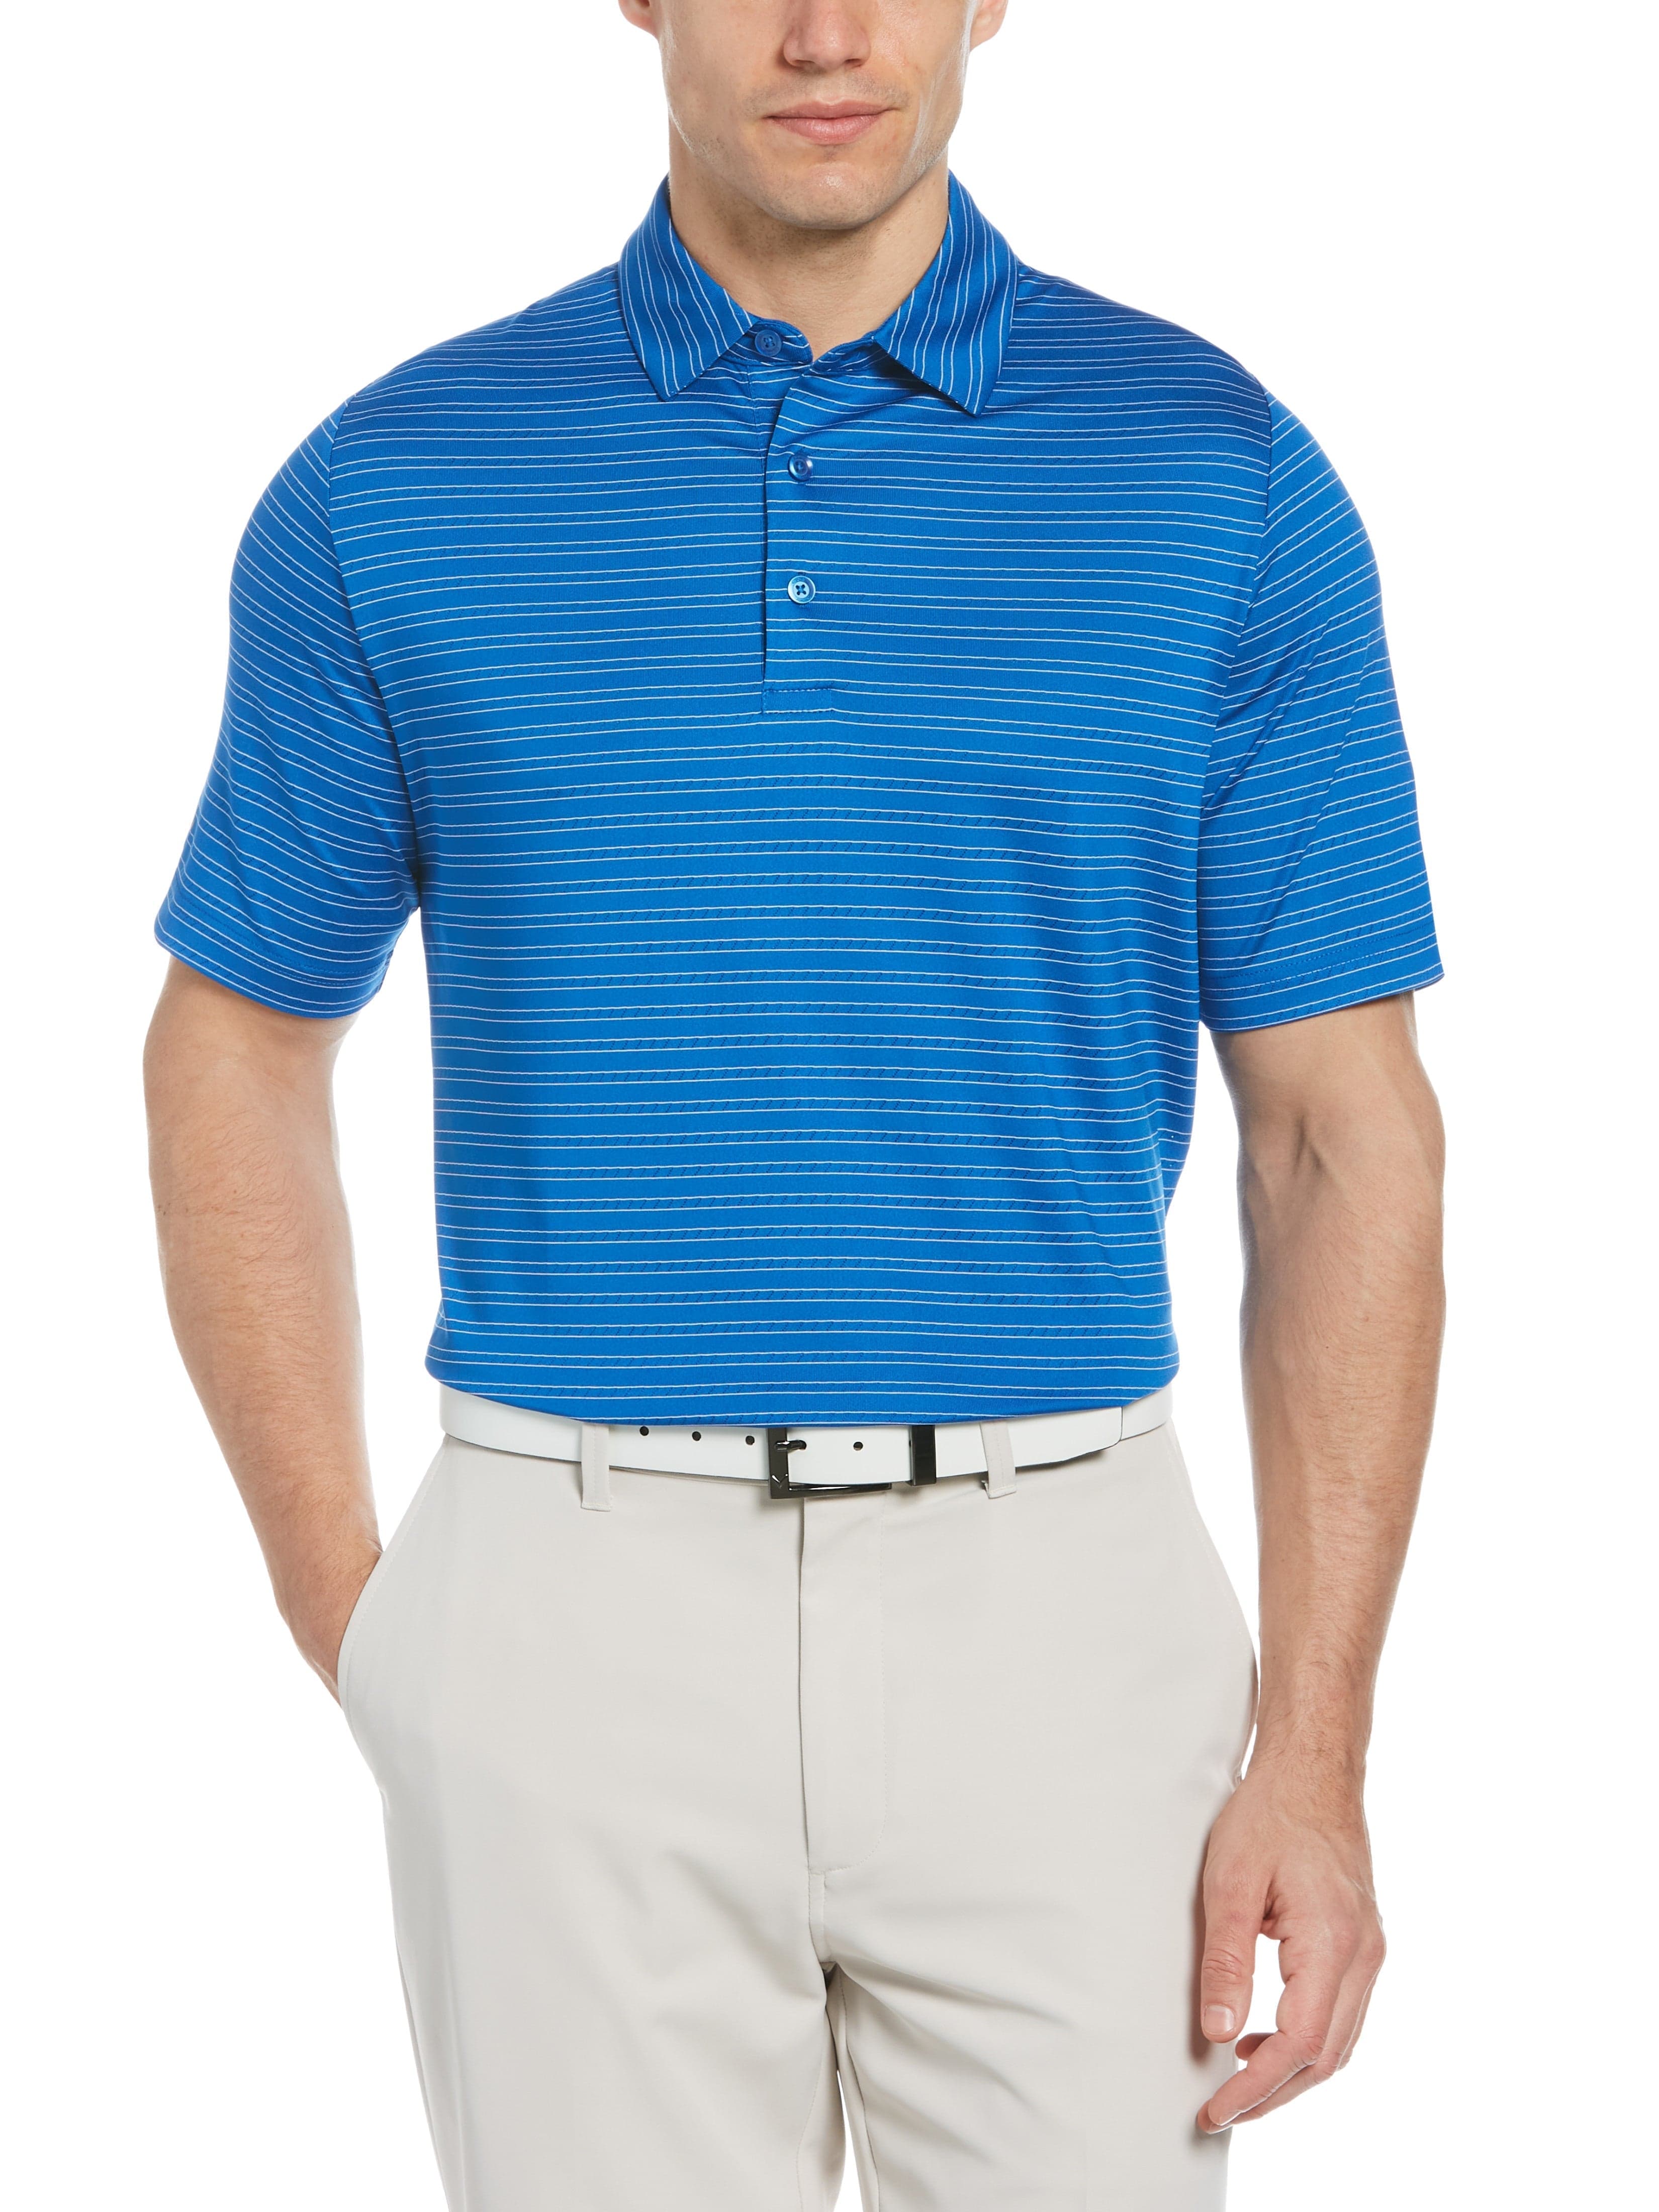 Callaway Apparel Mens Fine Line Ventilated Stripe Golf Polo Shirt, Size Small, Magnetic Blue, Polyester/Spandex | Golf Apparel Shop